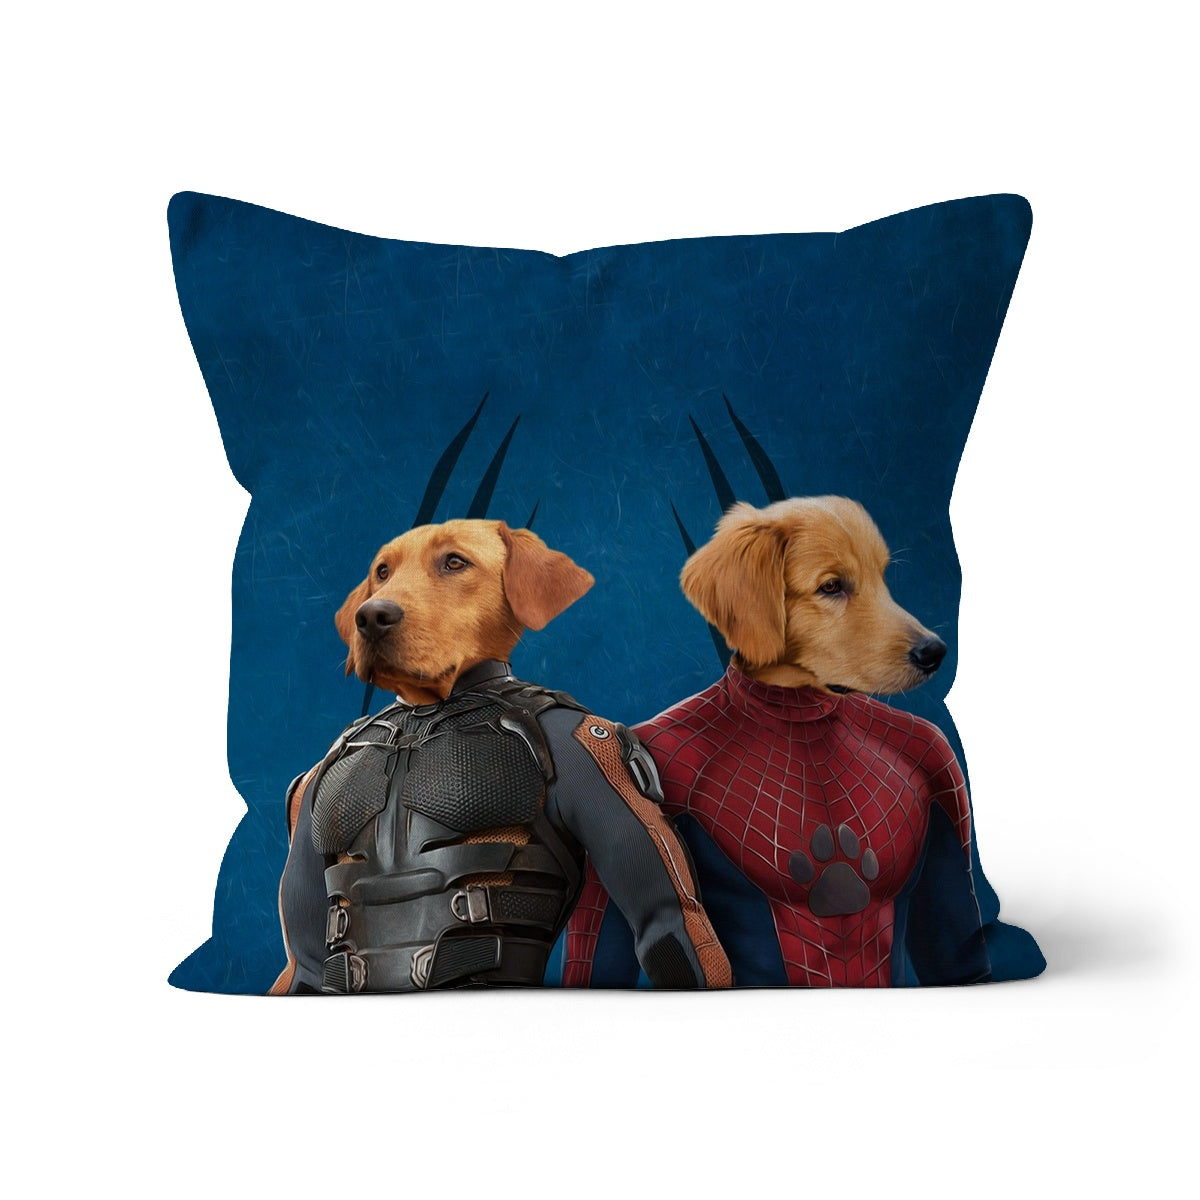 Wolverine & Spider Paw, Paw & Glory, pawandglory, pillow custom, my pet pillow, dog pillow custom, pillow of your pet, personalised pet pillow, customized throw pillows, Pet Portraits cushion,